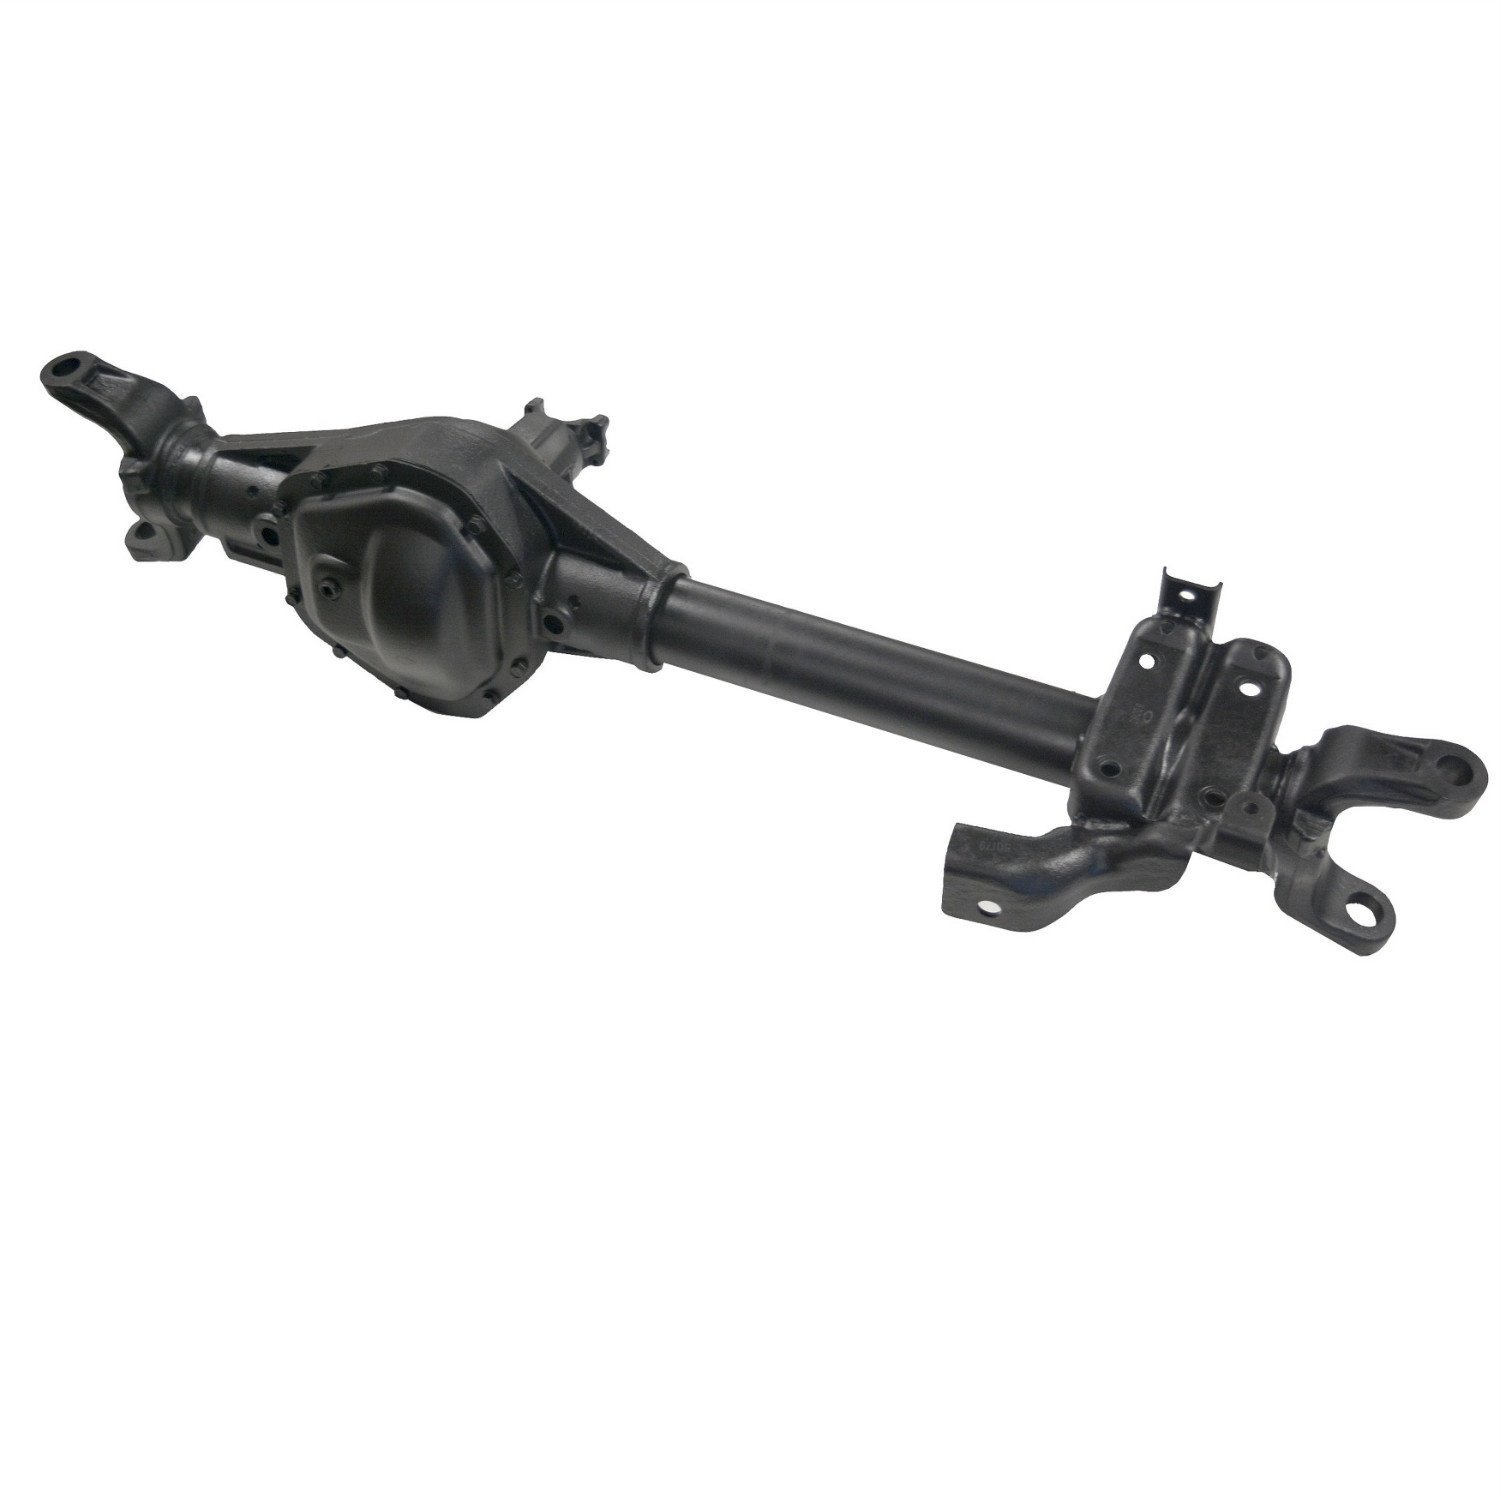 Remanufactured Complete Axle Assembly for Dana 50 1999 F250 & F350, 4.30 , SRW, Rear ABS